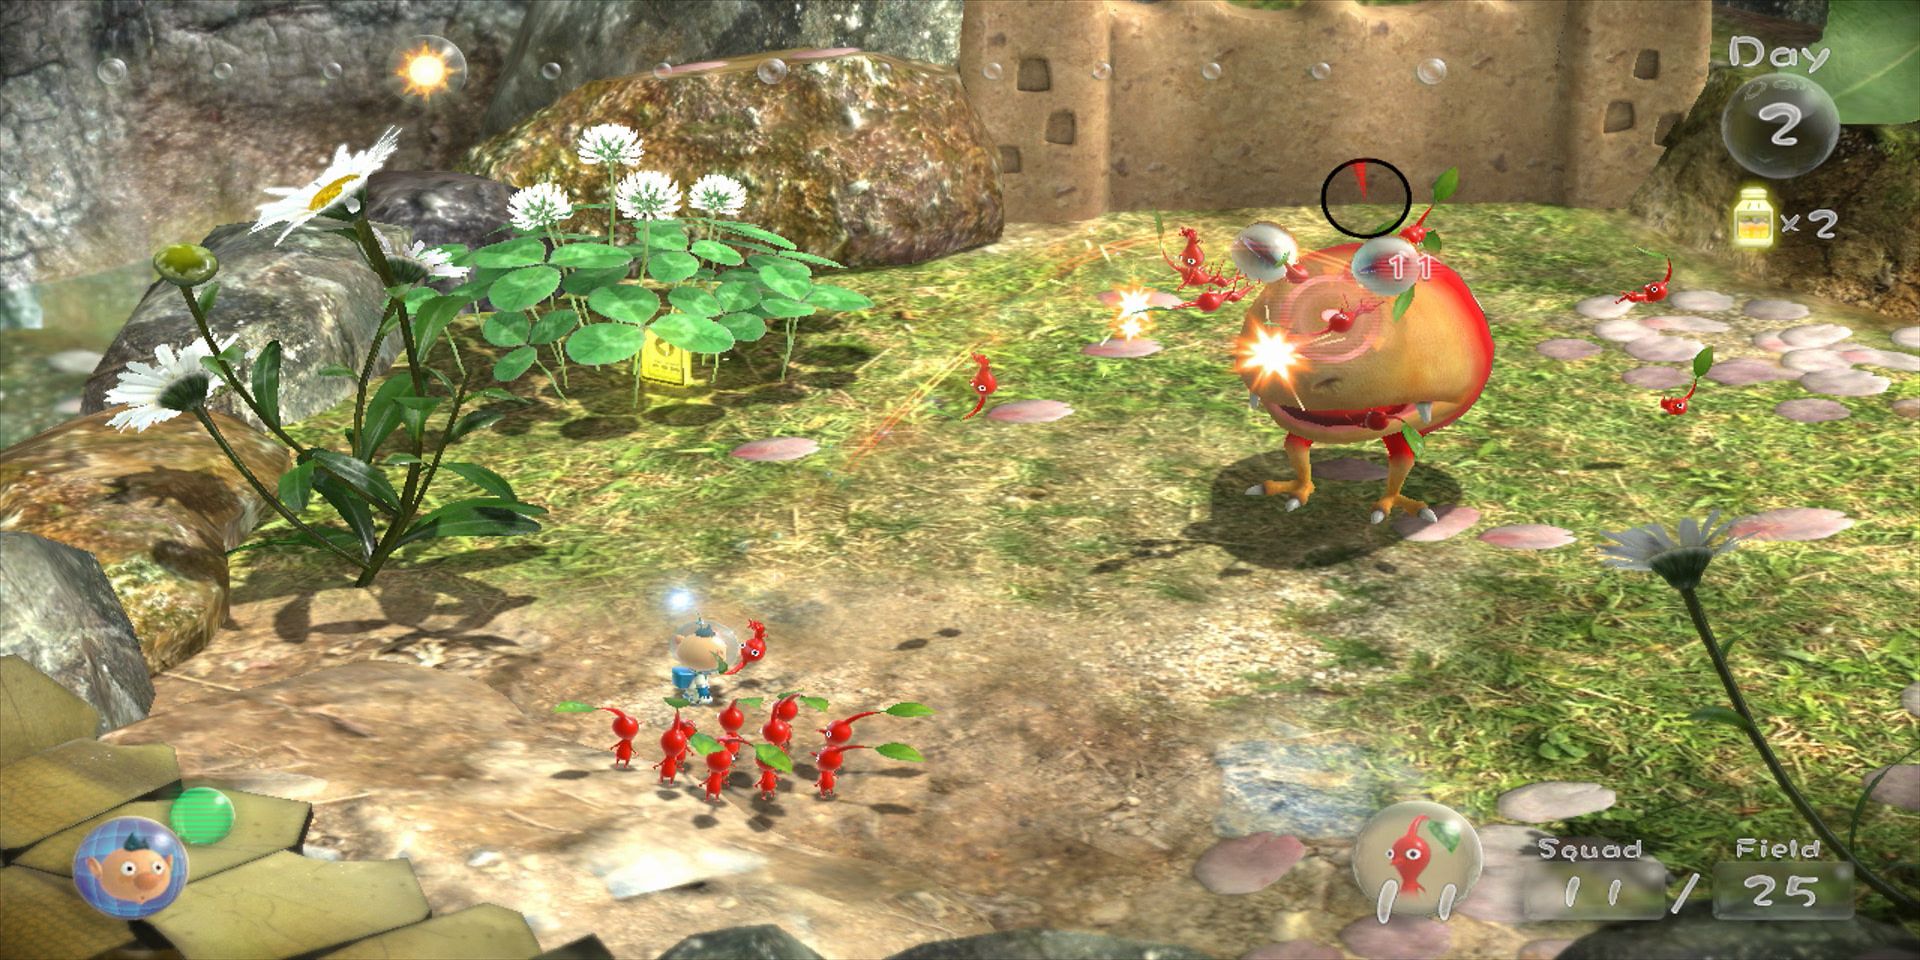 Pikmin 3 gameplay on the Nintendo Switch.